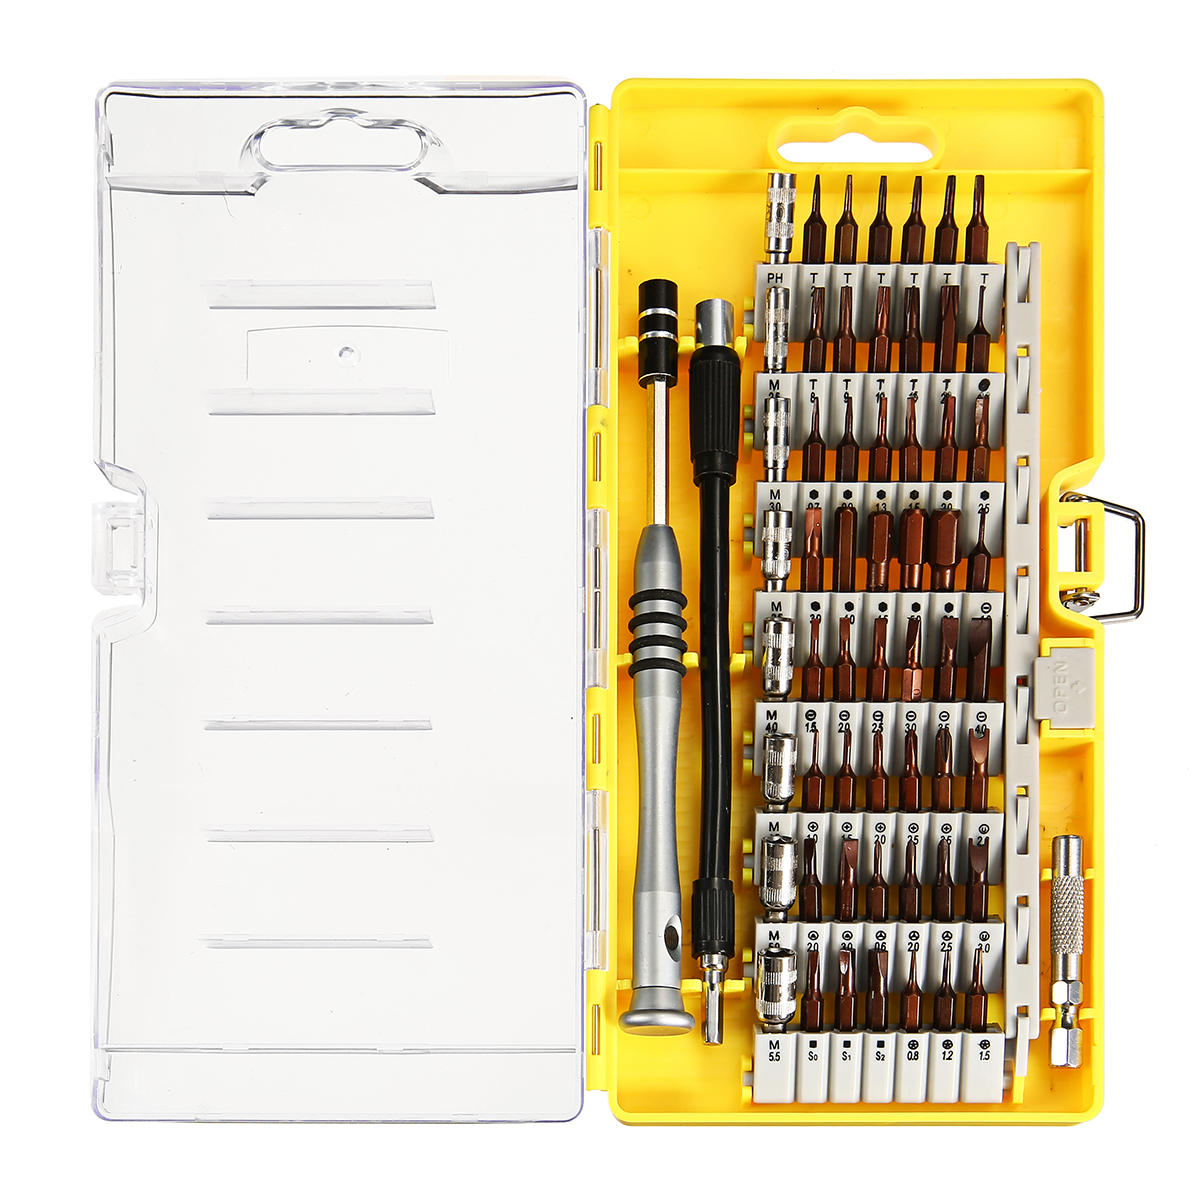 60 in 1 Precision Screwdrivers Set S2 Alloy Steel Magnetic Bits Professional...